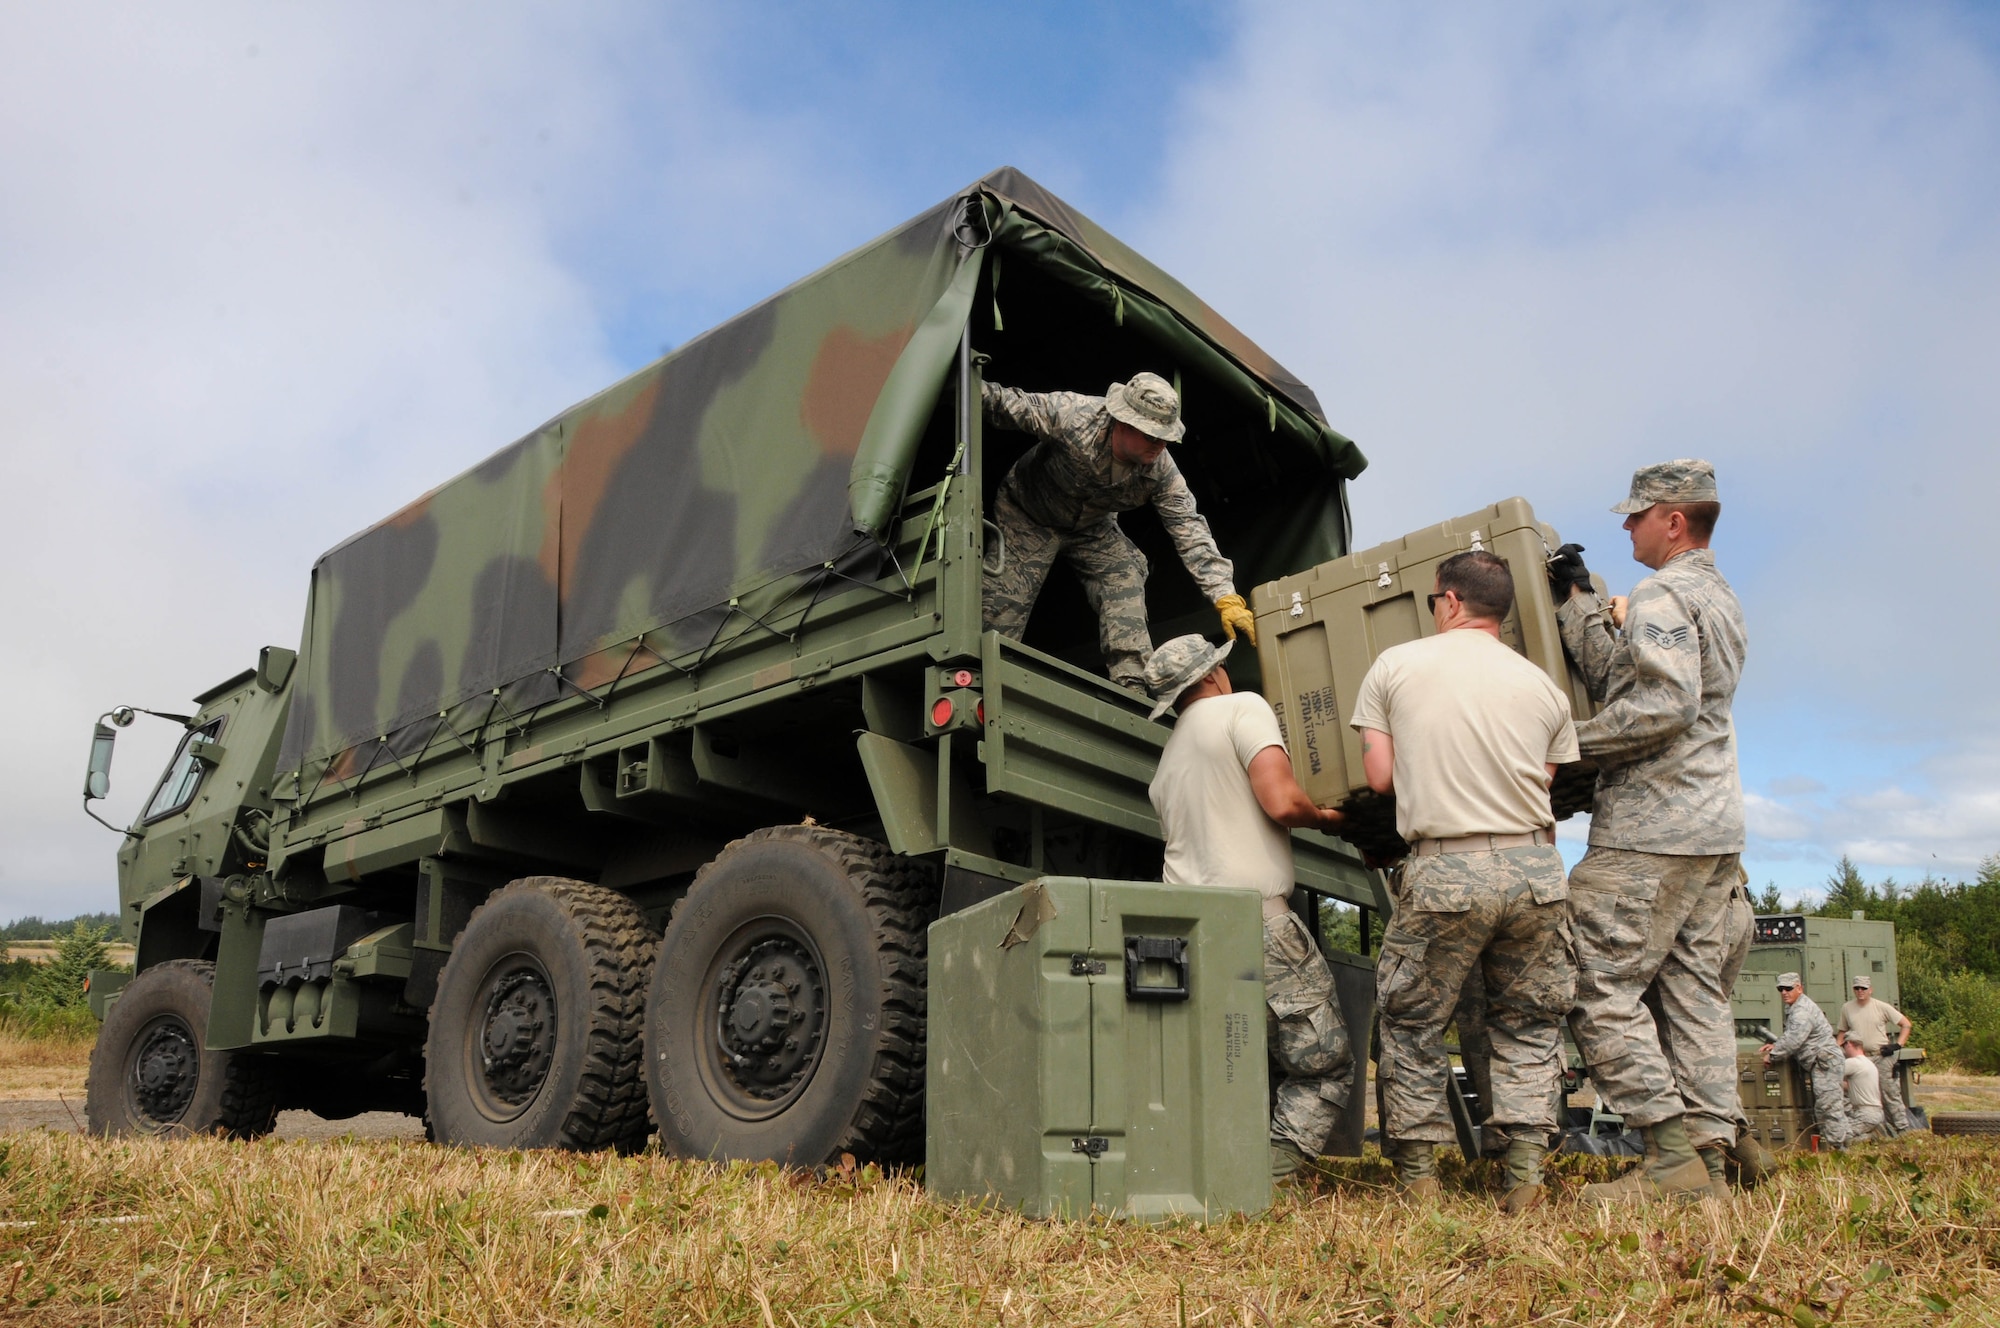 Oregon Air National Guard members, 270th Air Traffic Control Squadron, load a M1083 five-ton cargo truck during the ATCS annual training at Newport, Ore., Aug. 10, 2016. Members convoyed nearly 300 miles from Klamath Falls, Ore., where they set up their MSN-7 mobile tower, TRN-48 Tactical Air Navigation (TACAN) system, and all supporting equipment which allows them to guide aircraft into and out of nearly any airfield in the world. (U.S. Air National Guard photo by Staff Sgt. Penny Snoozy)